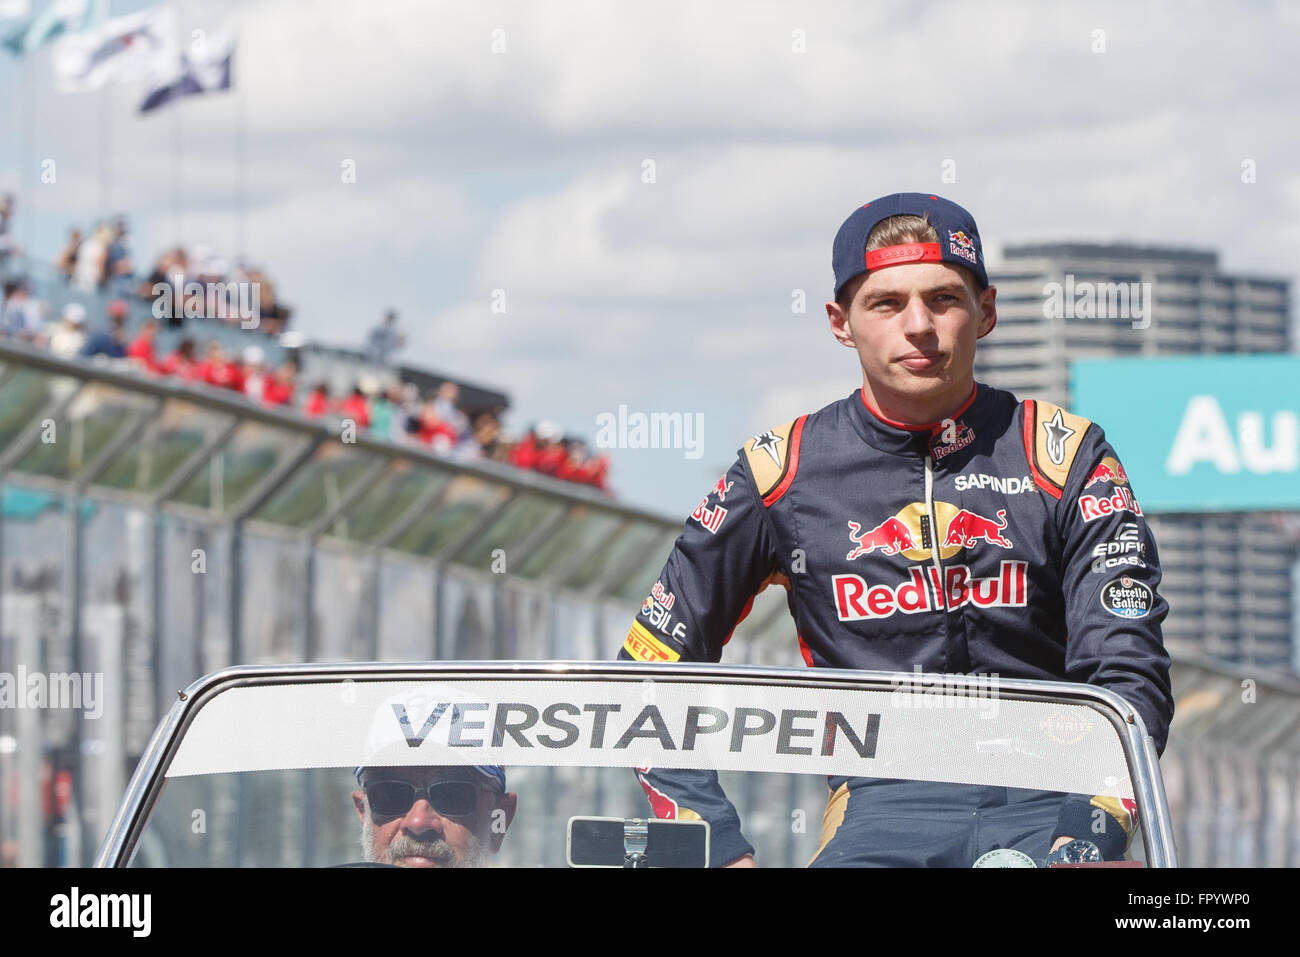 Albert Park, Melbourne, Australia. 20th Mar, 2016. Max Verstappen (NDL) #33 from the Scuderia Toro Rosso team at the drivers' parade prior to the 2016 Australian Formula One Grand Prix at Albert Park, Melbourne, Australia. Sydney Low/Cal Sport Media/Alamy Live News Stock Photo